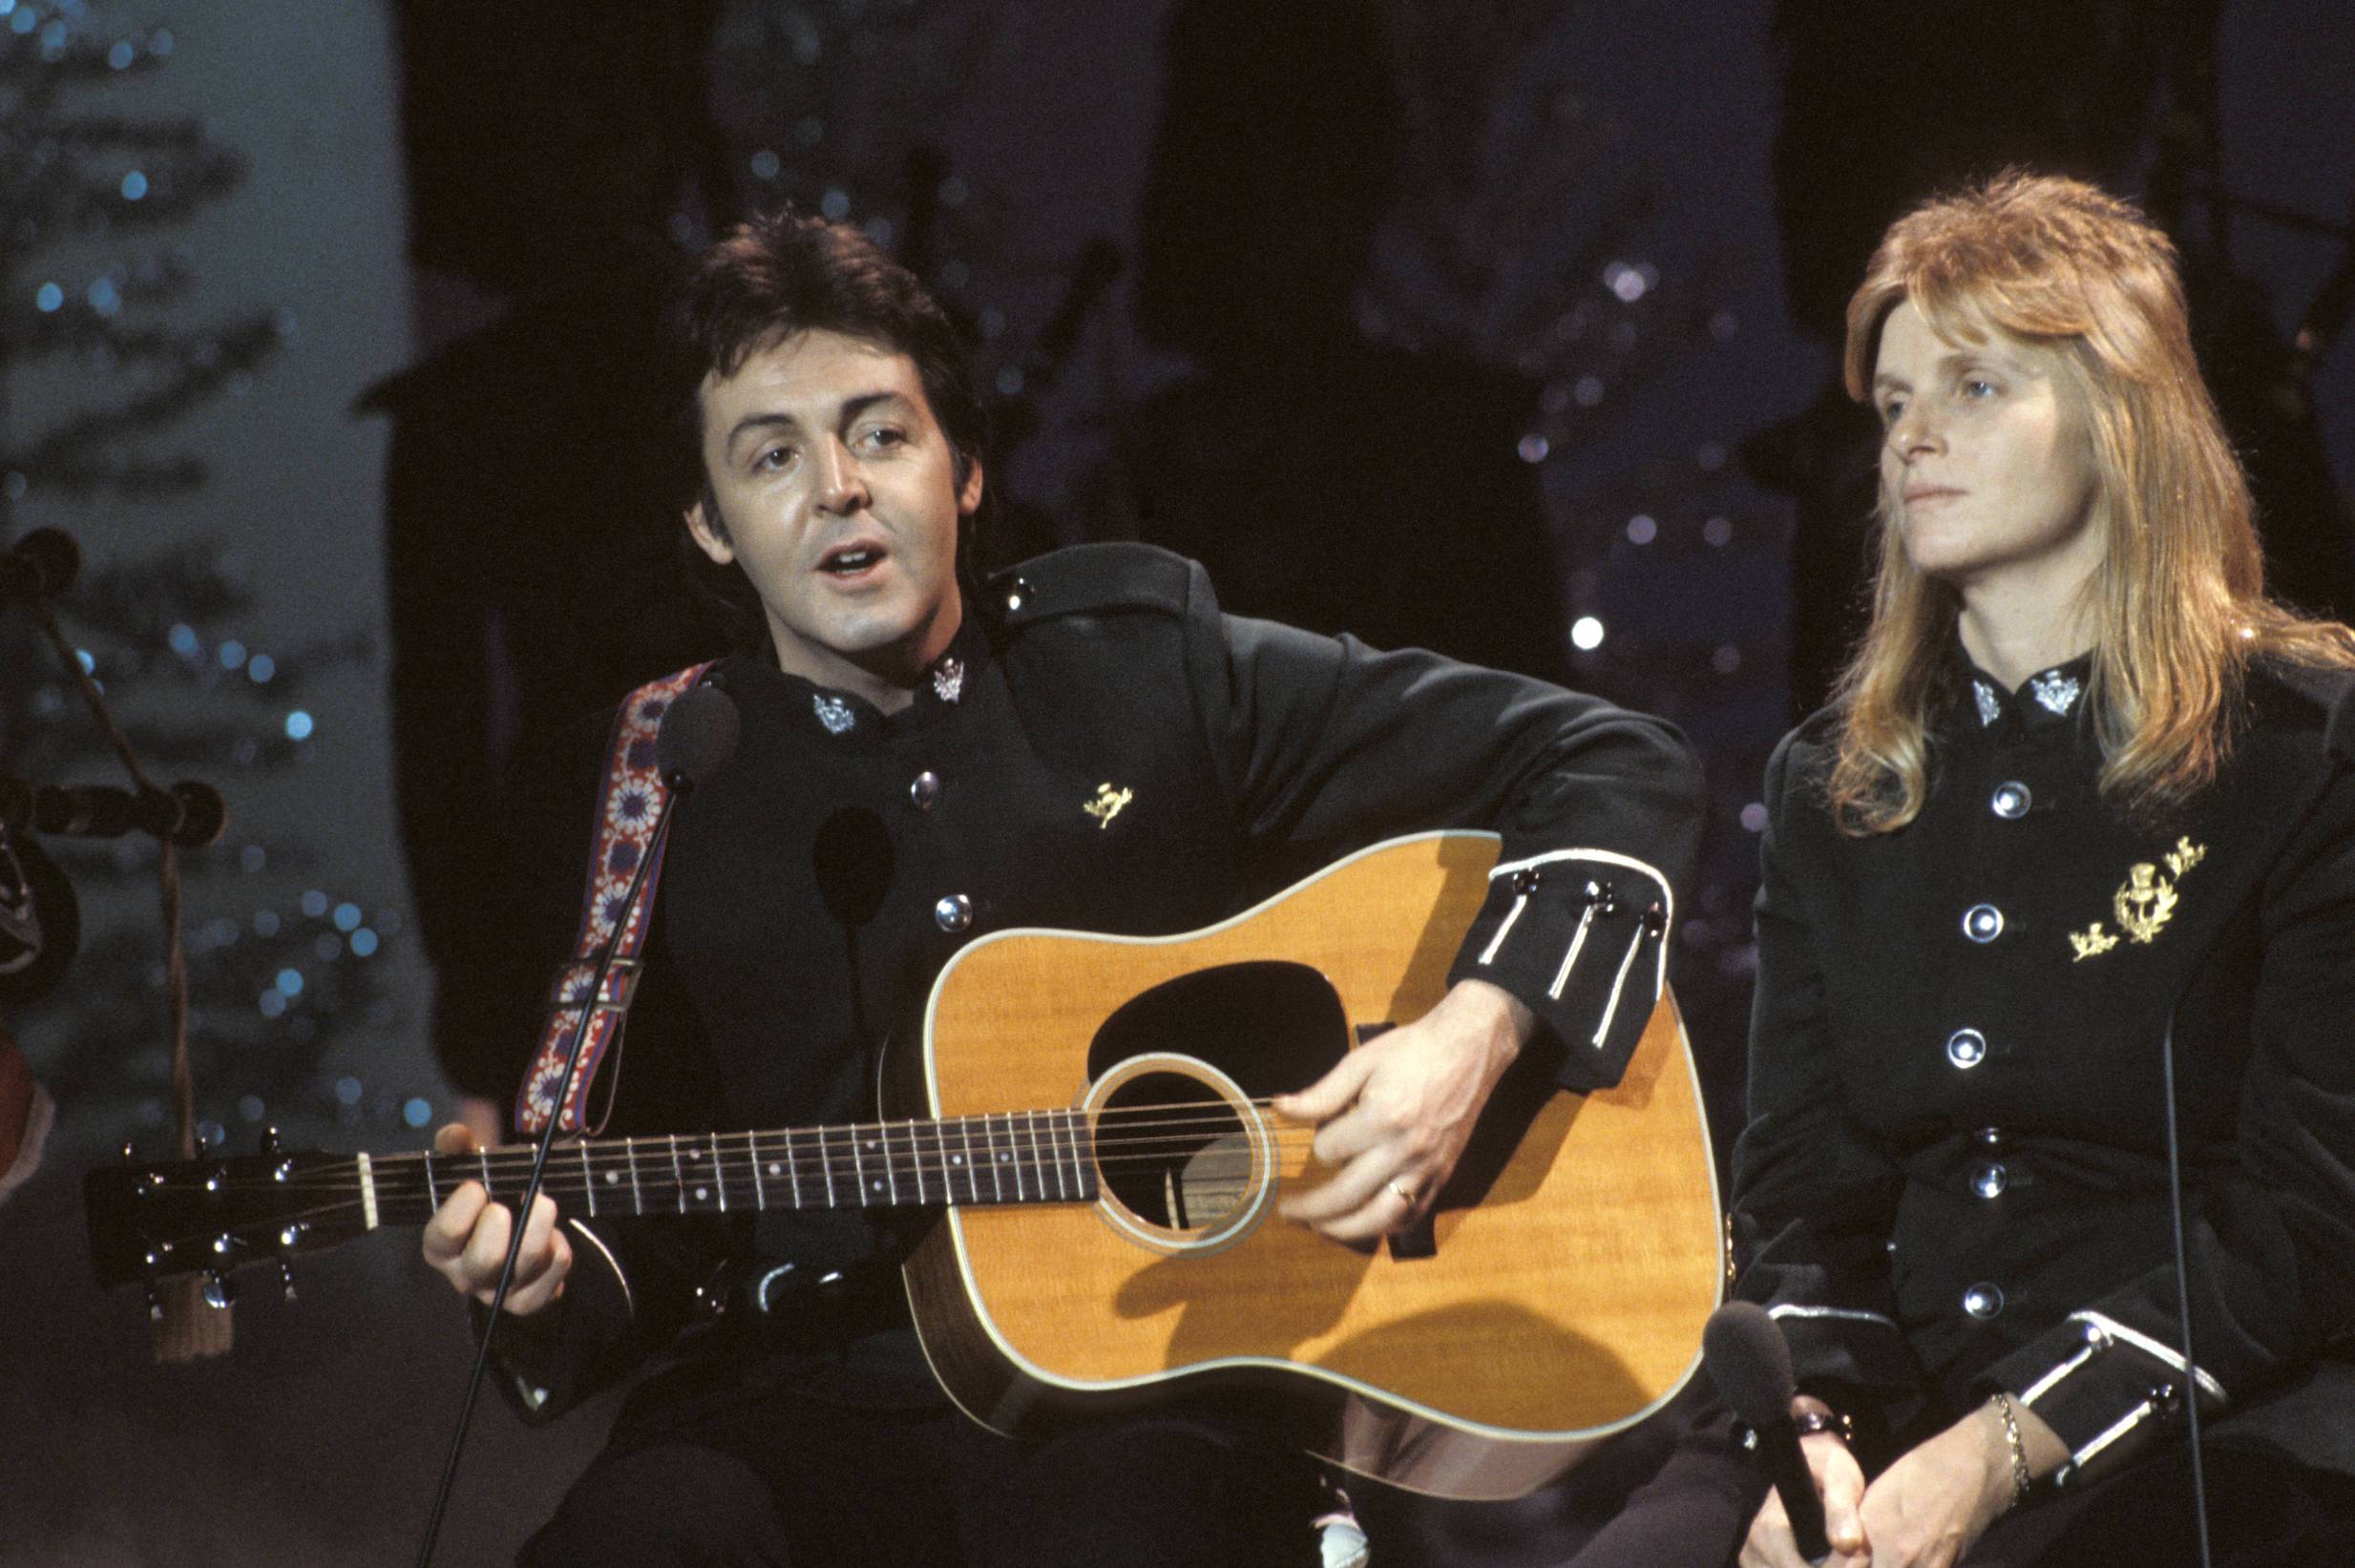 Paul McCartney and Linda McCartney perform with Wings on the Mike Yarwood Christmas Special